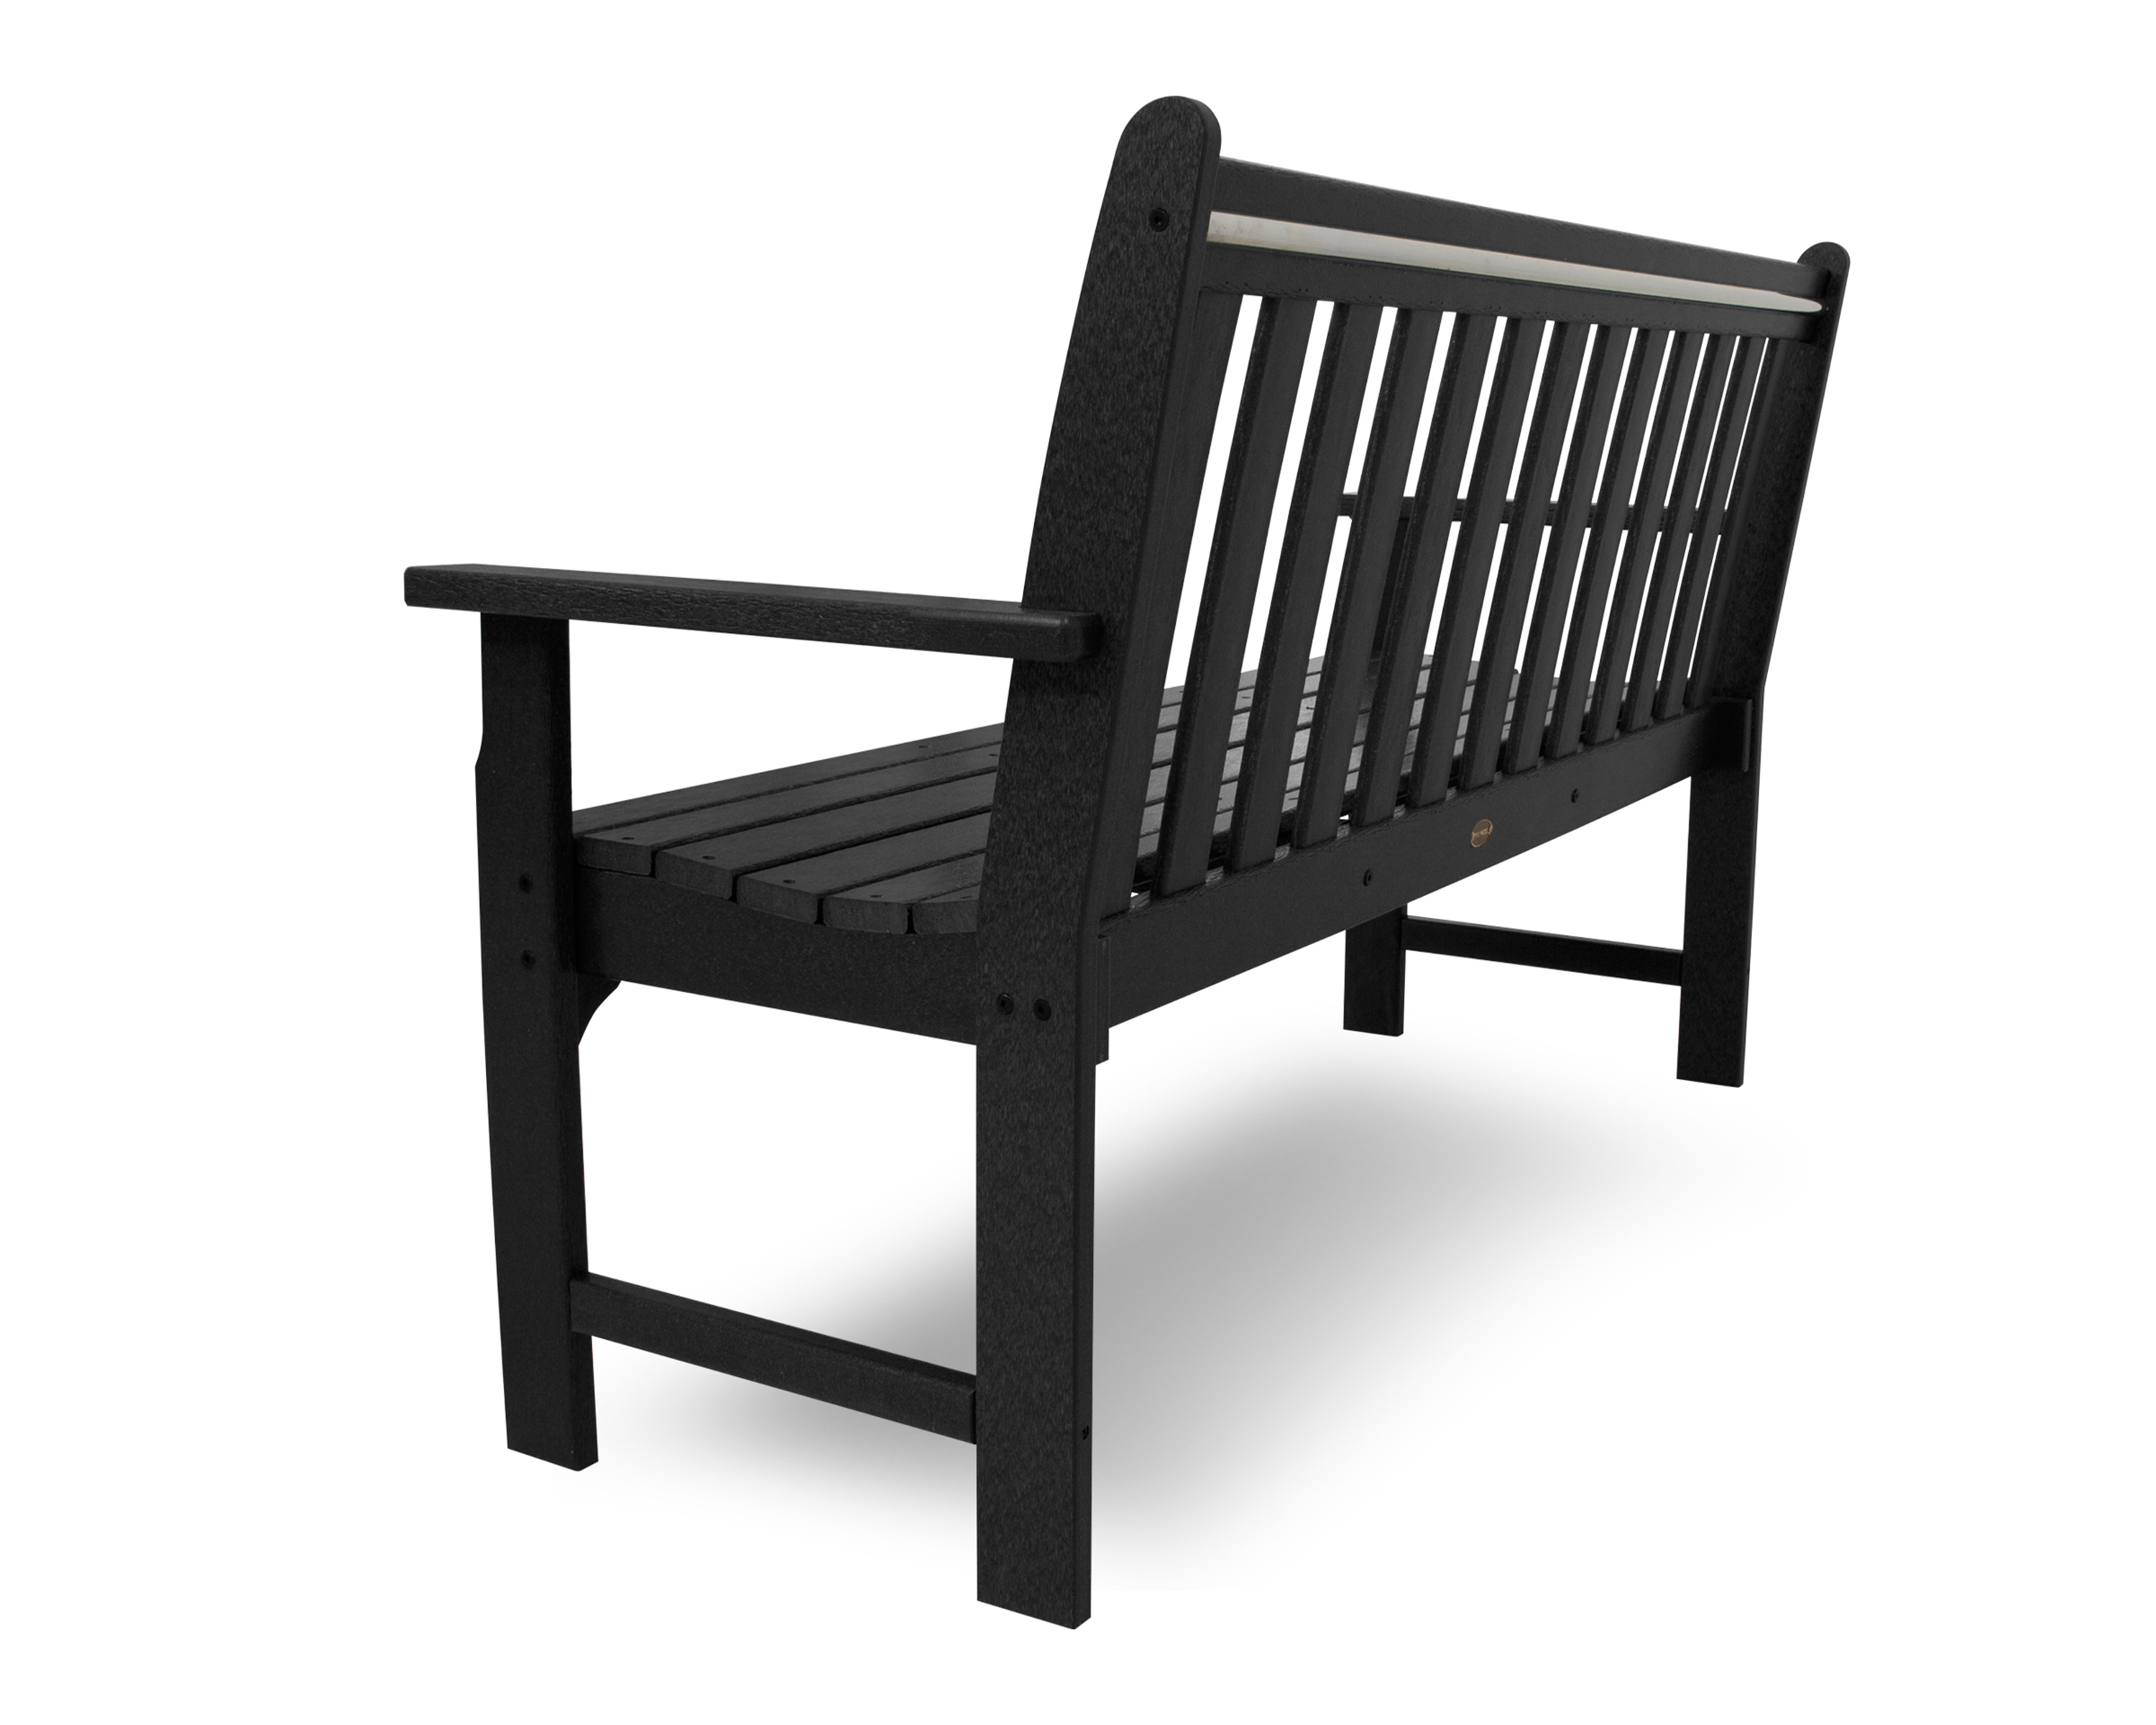 This Stylish Bench Is Ideal For Increasing Seating Space In Your Outdoor Entertainment Area. Polywood Furniture Is Constructed Of Solid Polywood Lumber That